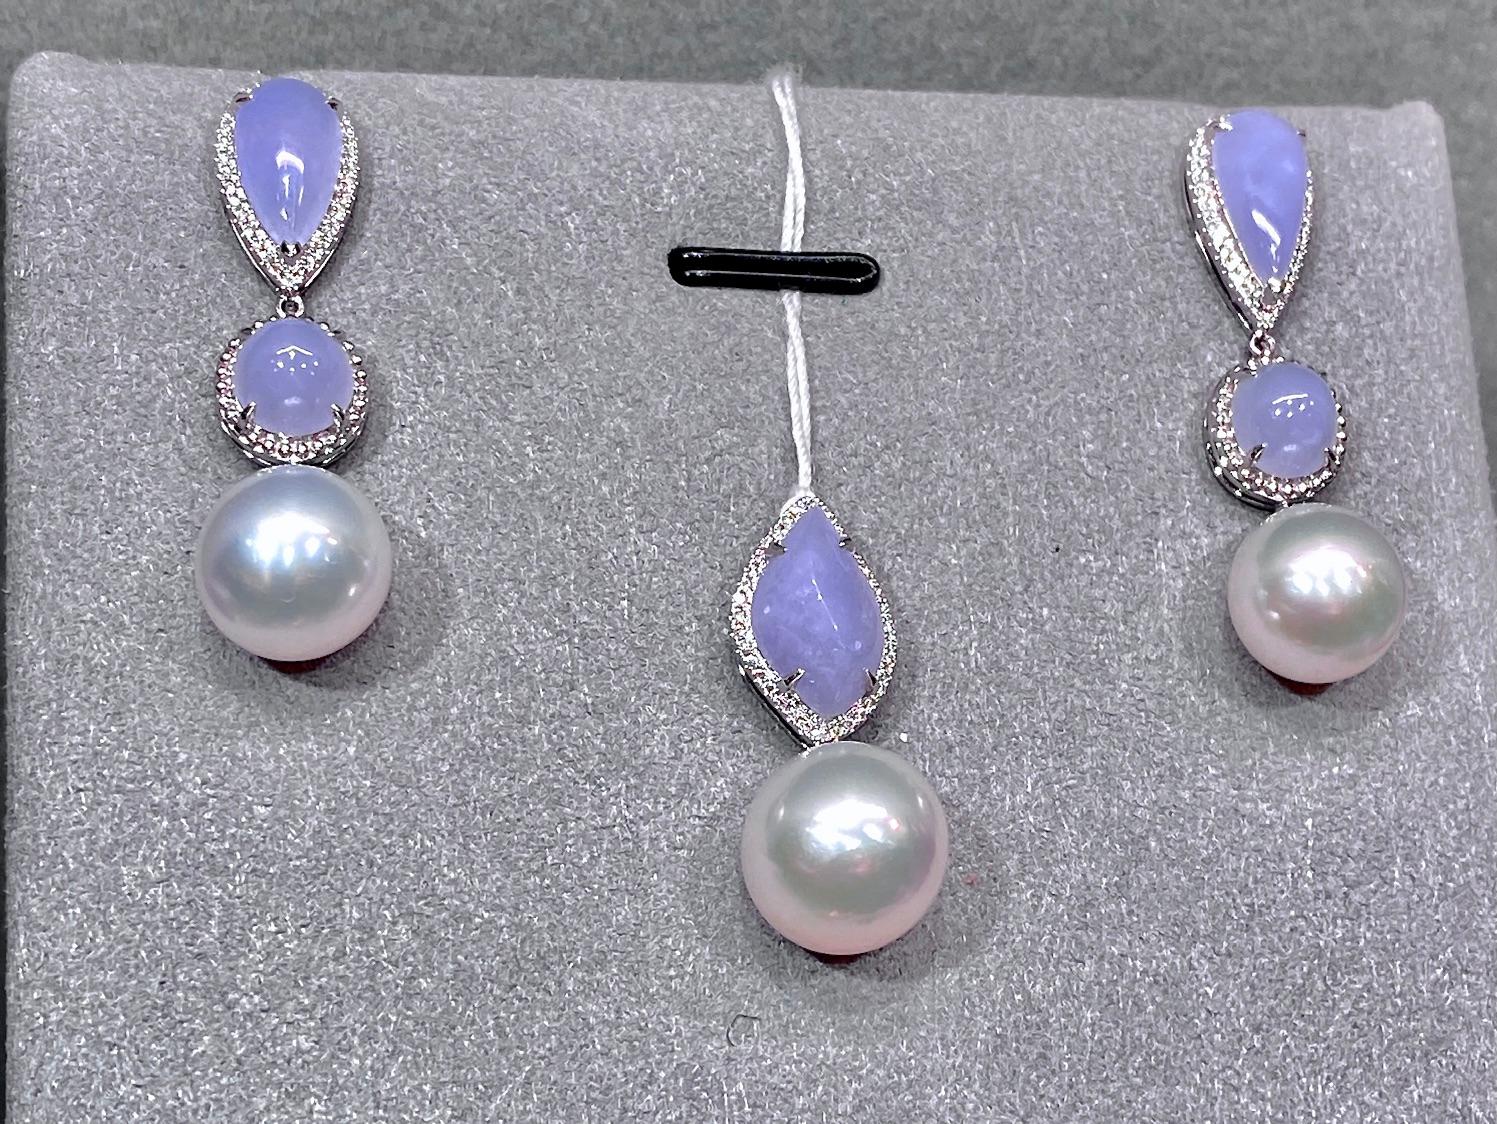 White South Sea Pearls with Type A Lavender Jadeite and Diamond Jewellery Suite in 18K White Gold. 

Earring: 
The Earring consists of 4 Type A Lavender Jadeite. 2 in raindrop cabochon and 2 round cabochon. The pearls are suspended underneath the